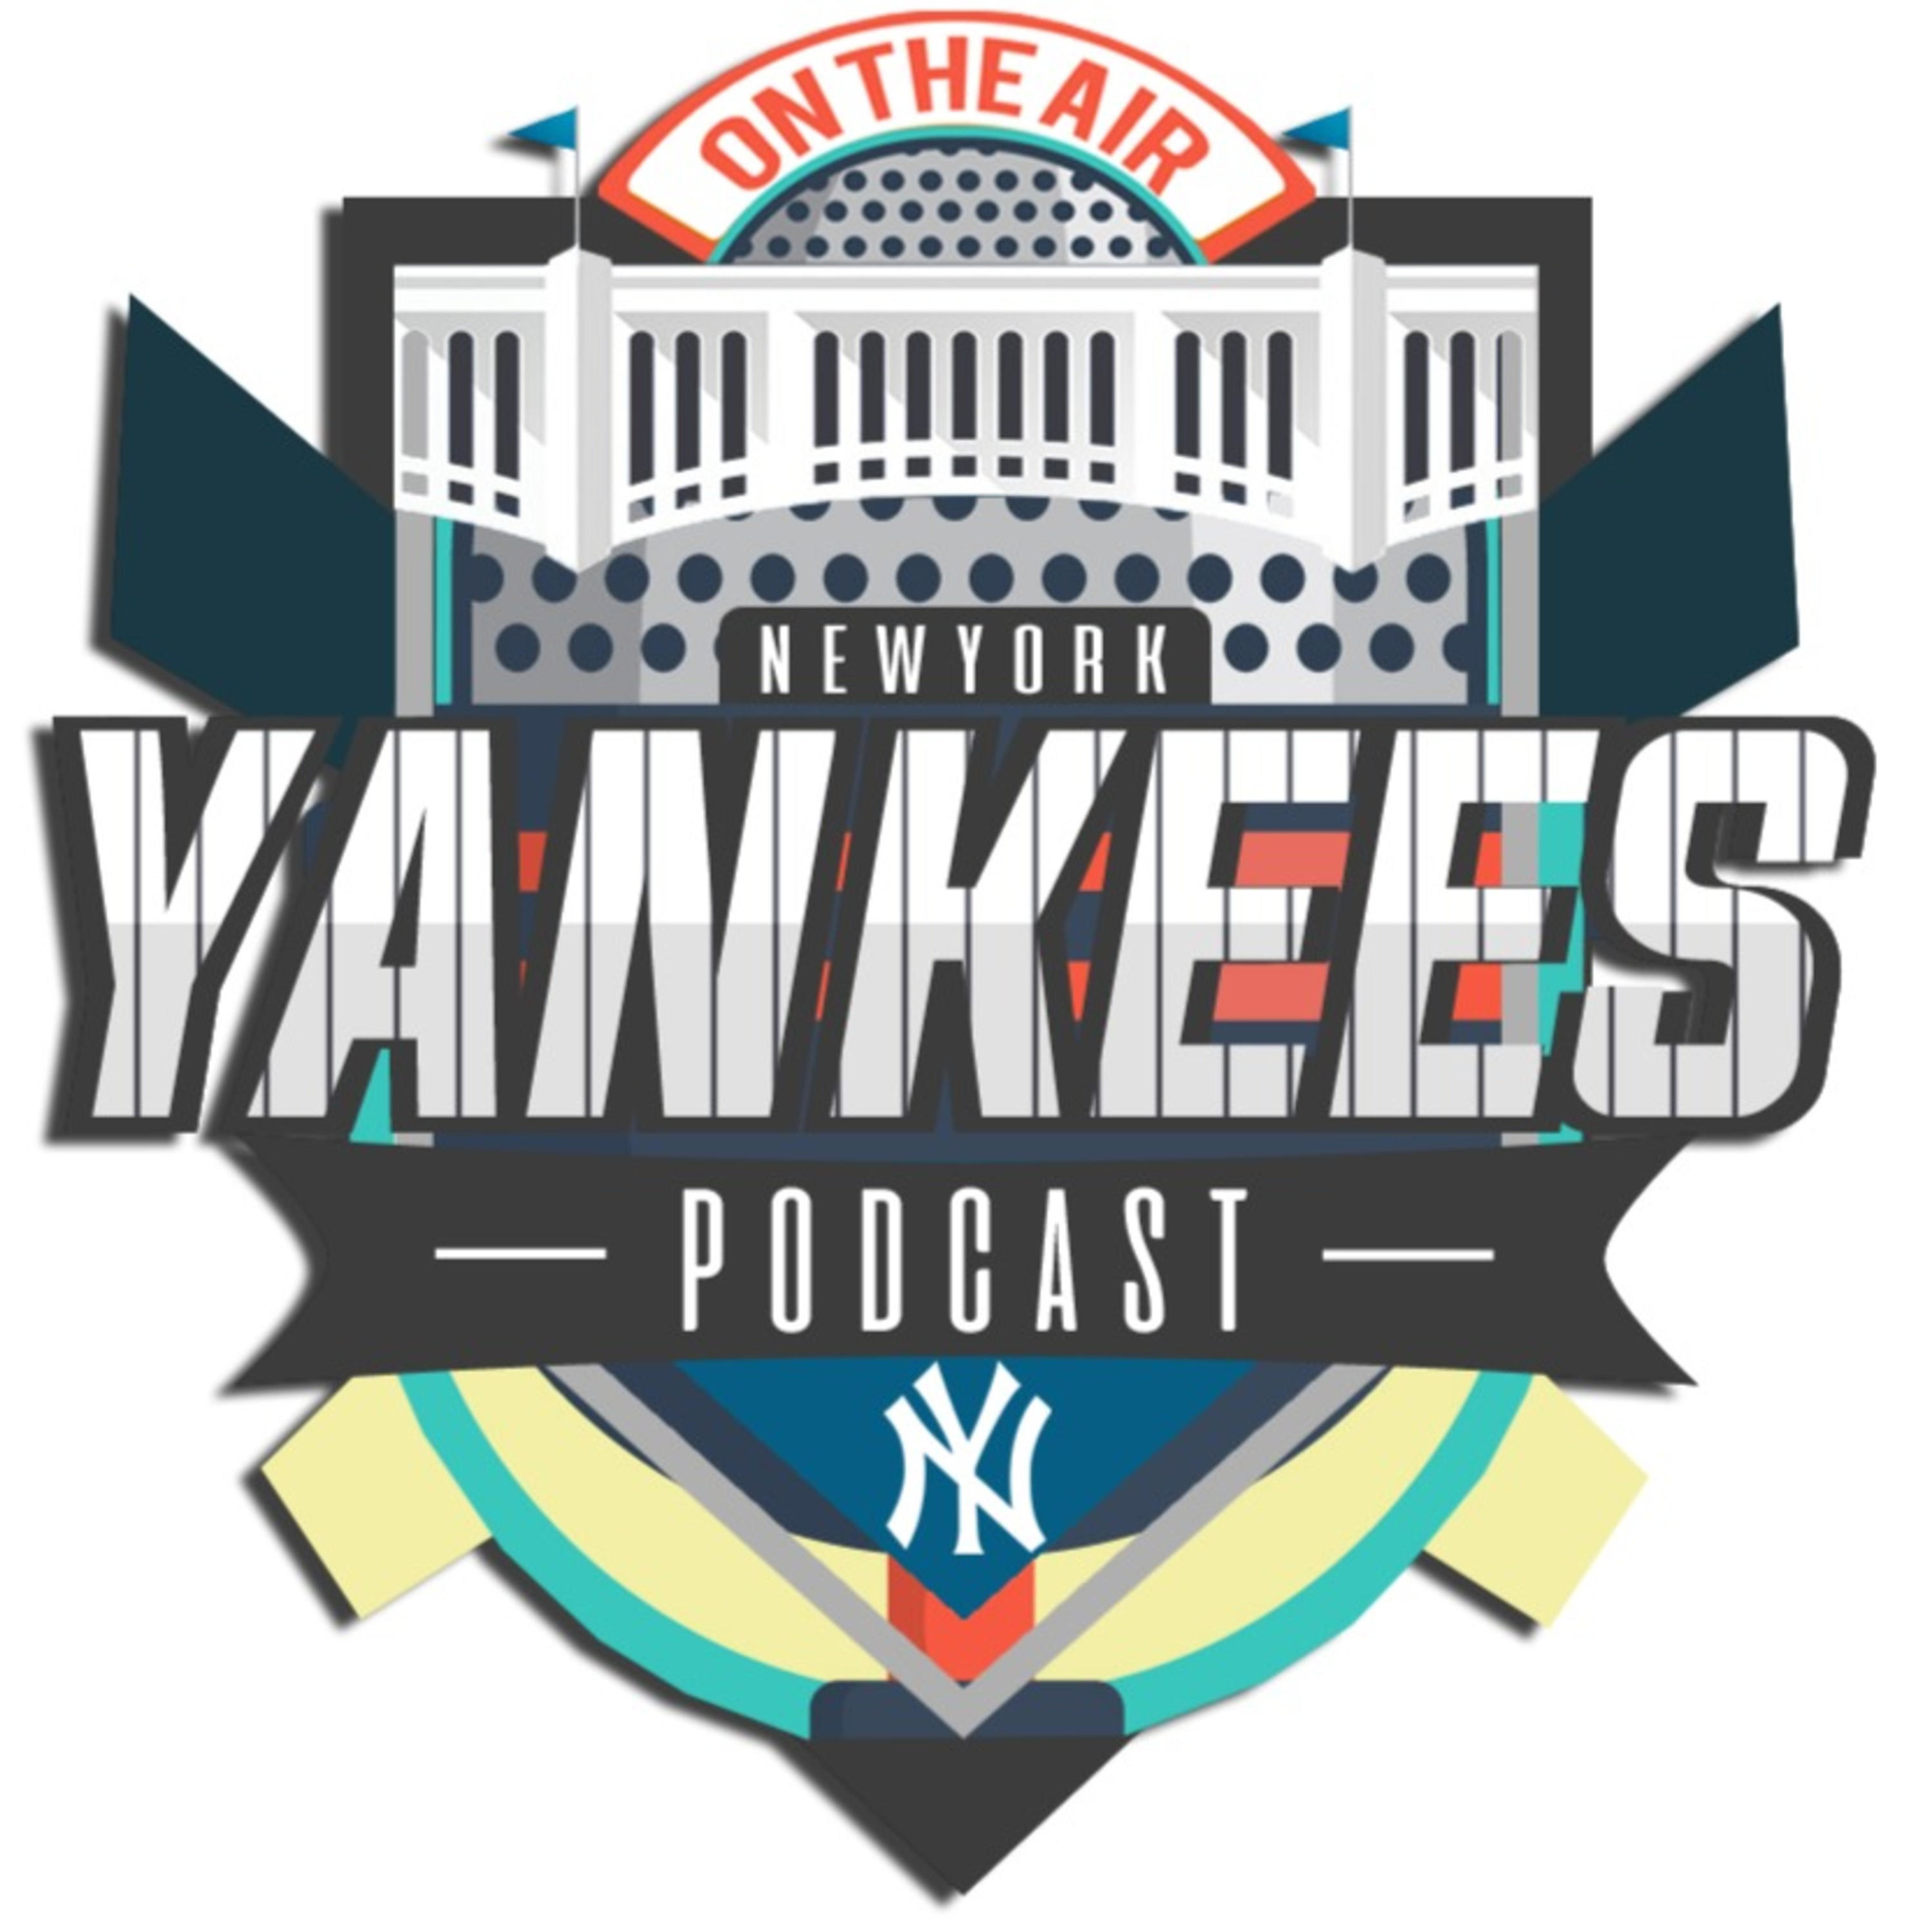 New York Yankees Hungary Podcast - Bé x DS! x Mike - Episode 6